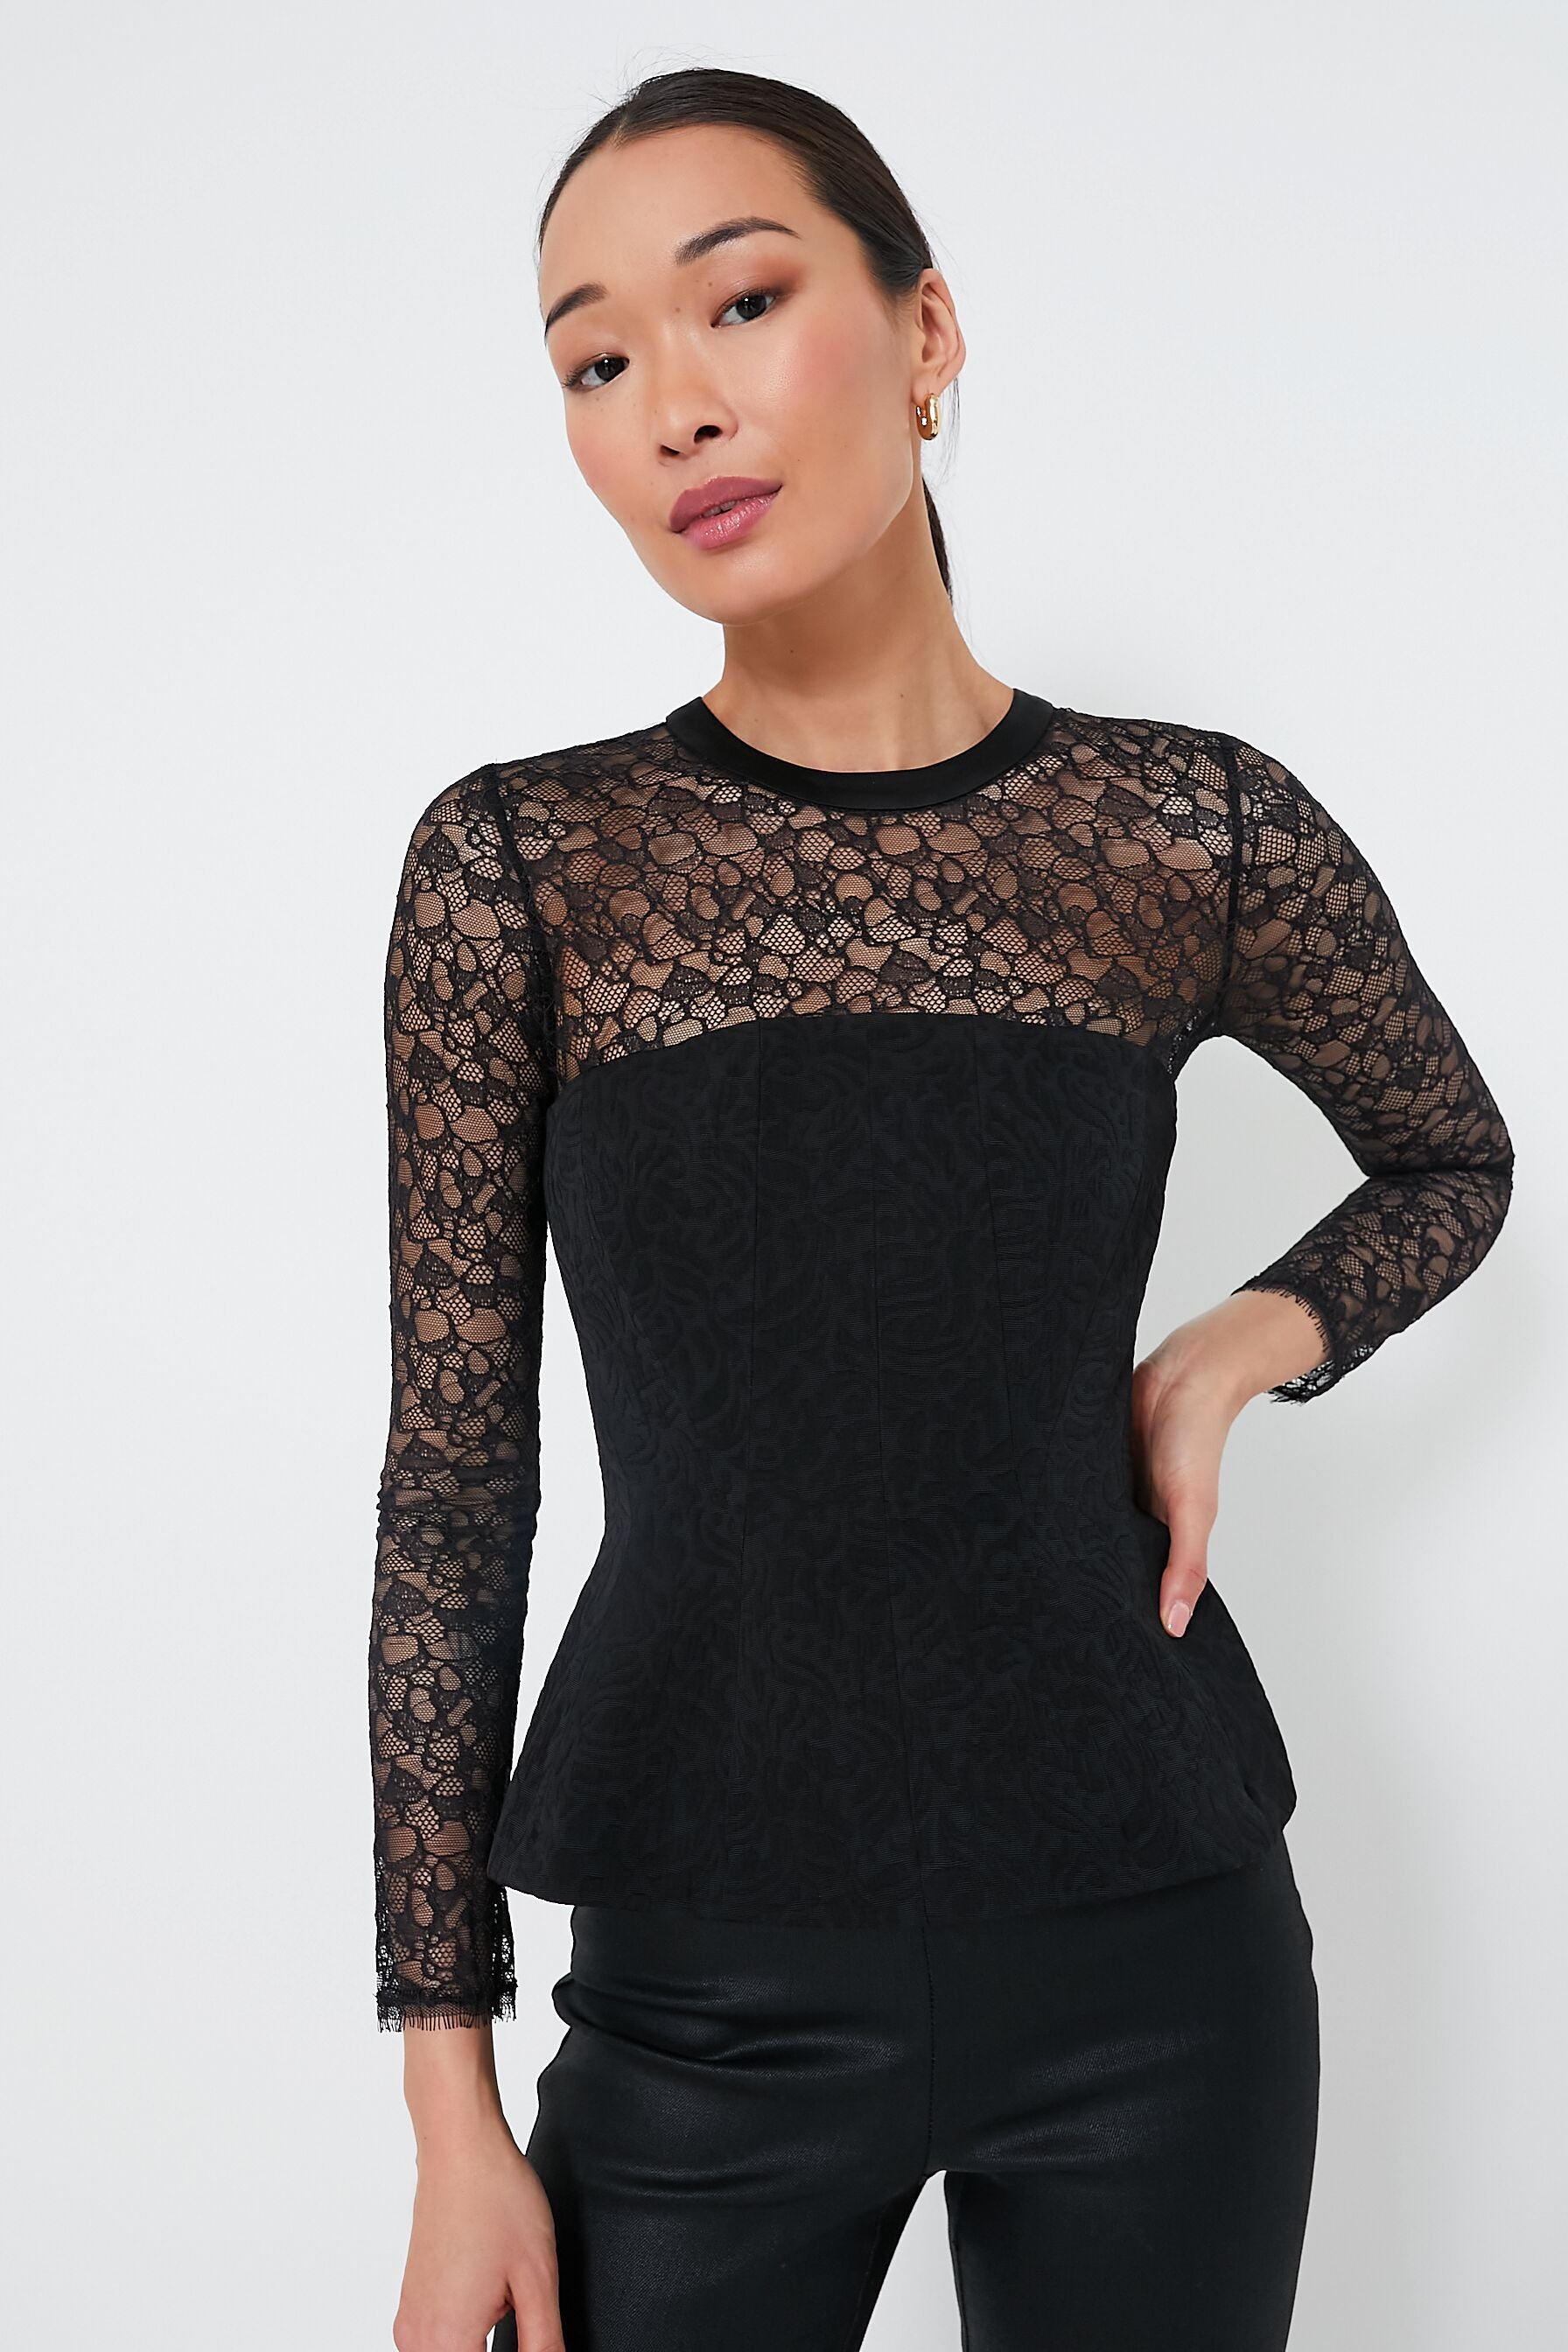 Shirley lace bustier crop top in black - Simkhai